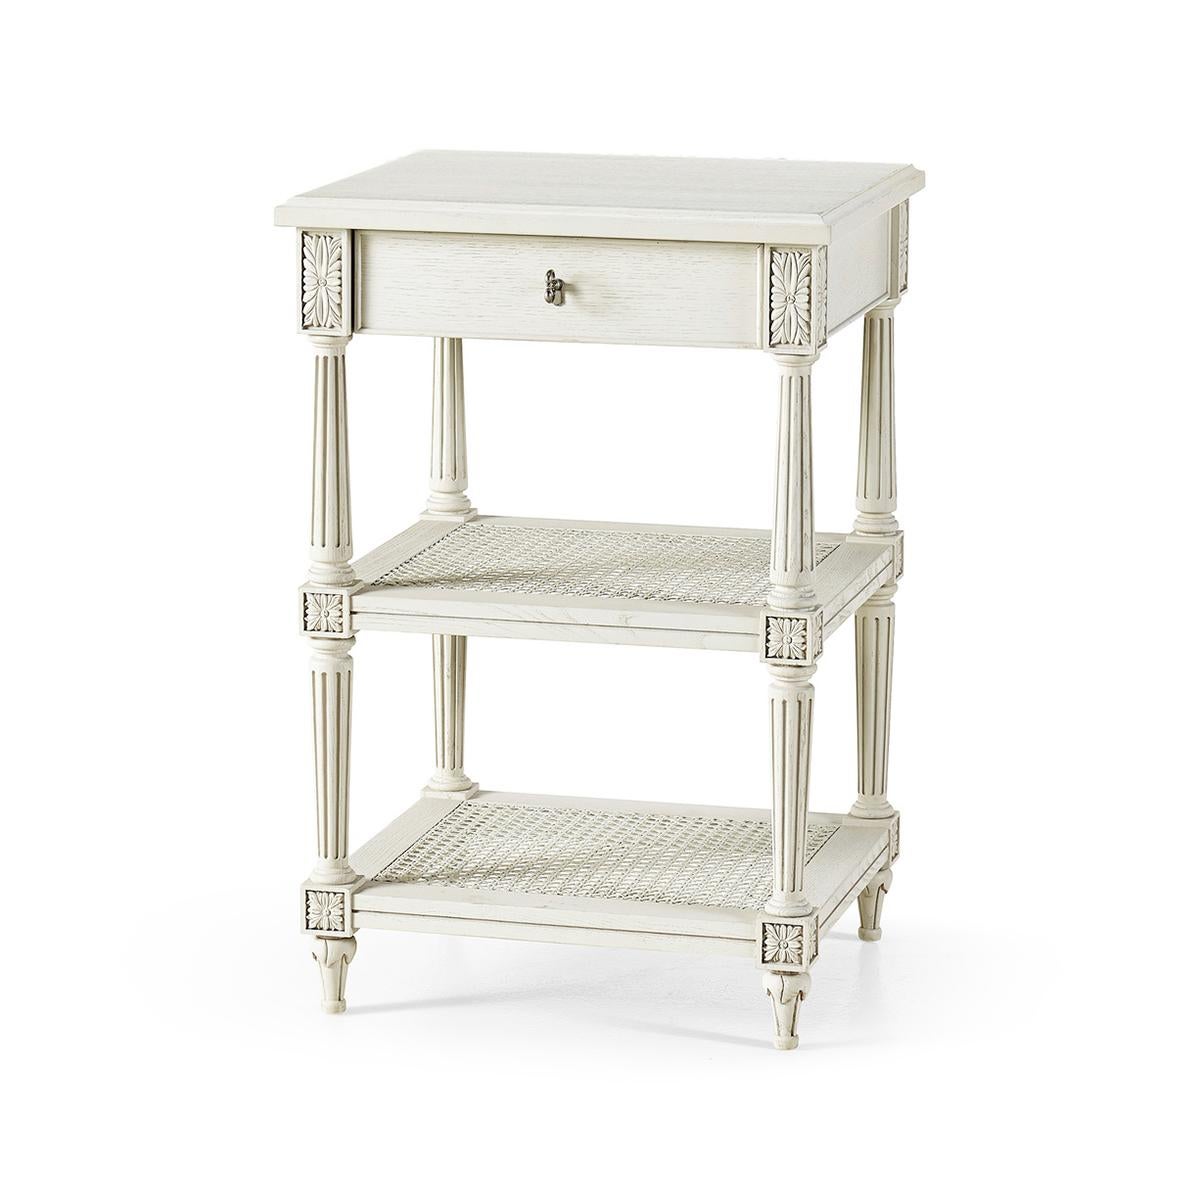 French Painted Nightstand, white painted one drawer bedside tables with floral carvings and a grey painted finish. Two cane shelves add a touch of modernism with turned and fluted supports.

Dimensions: 20